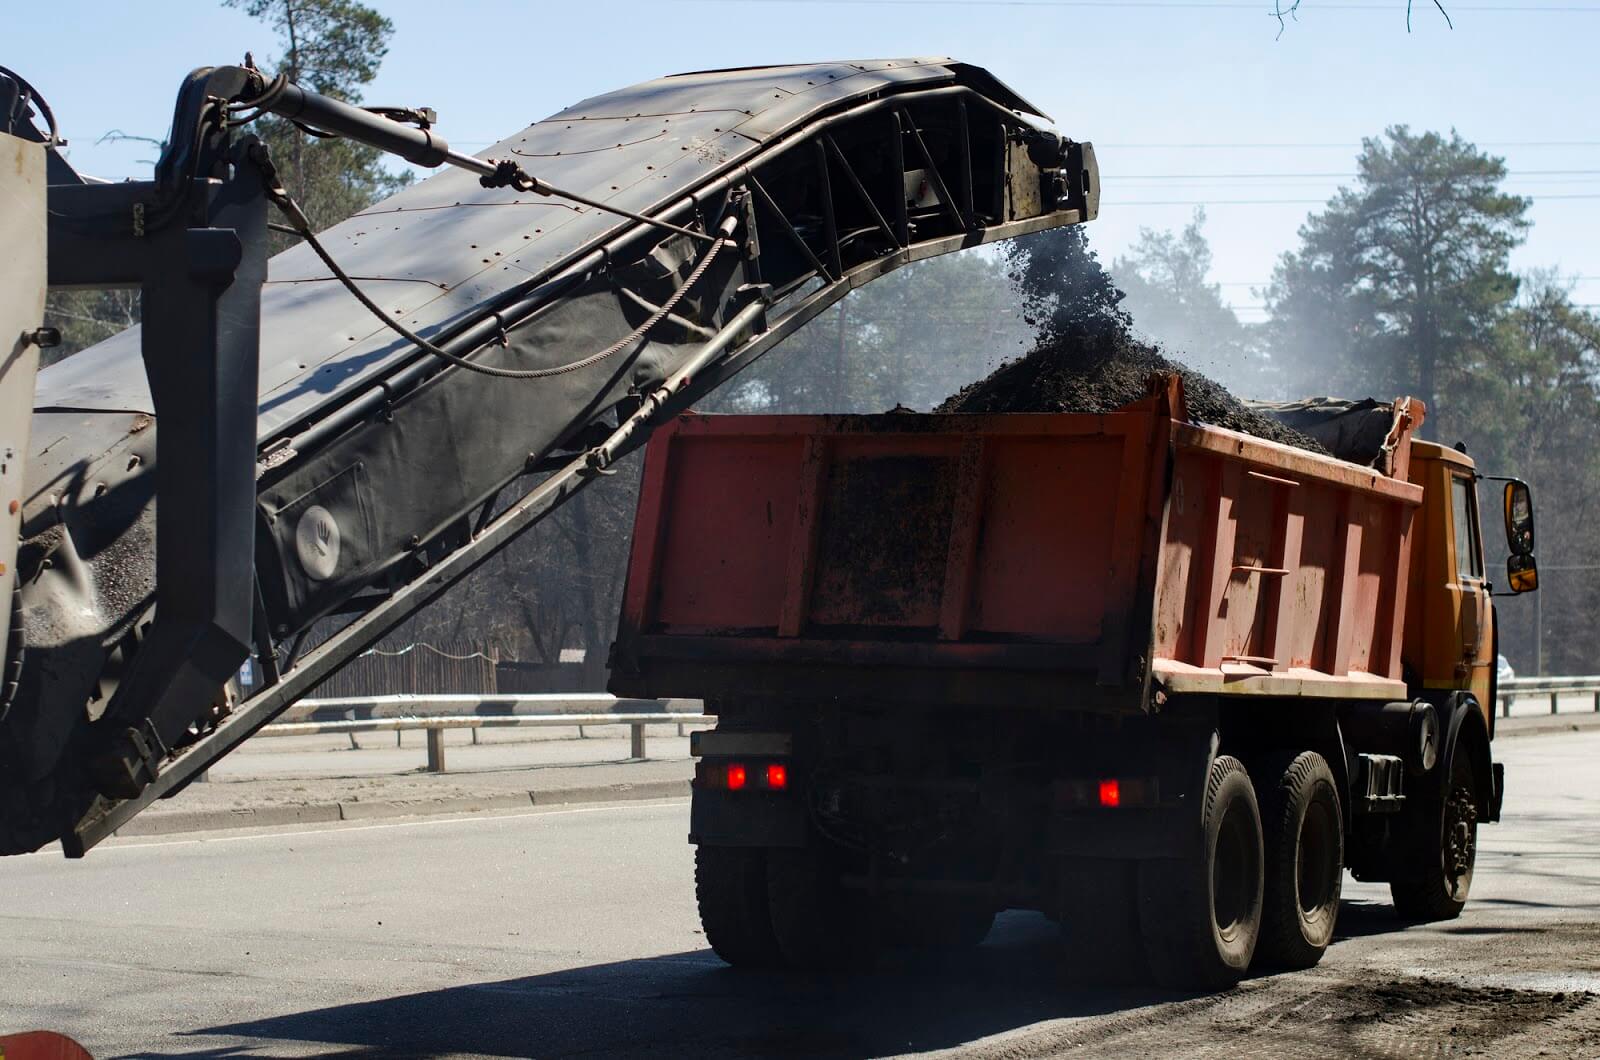 Orlando Asphalt Milling | Behind The Scenes Of Our Process